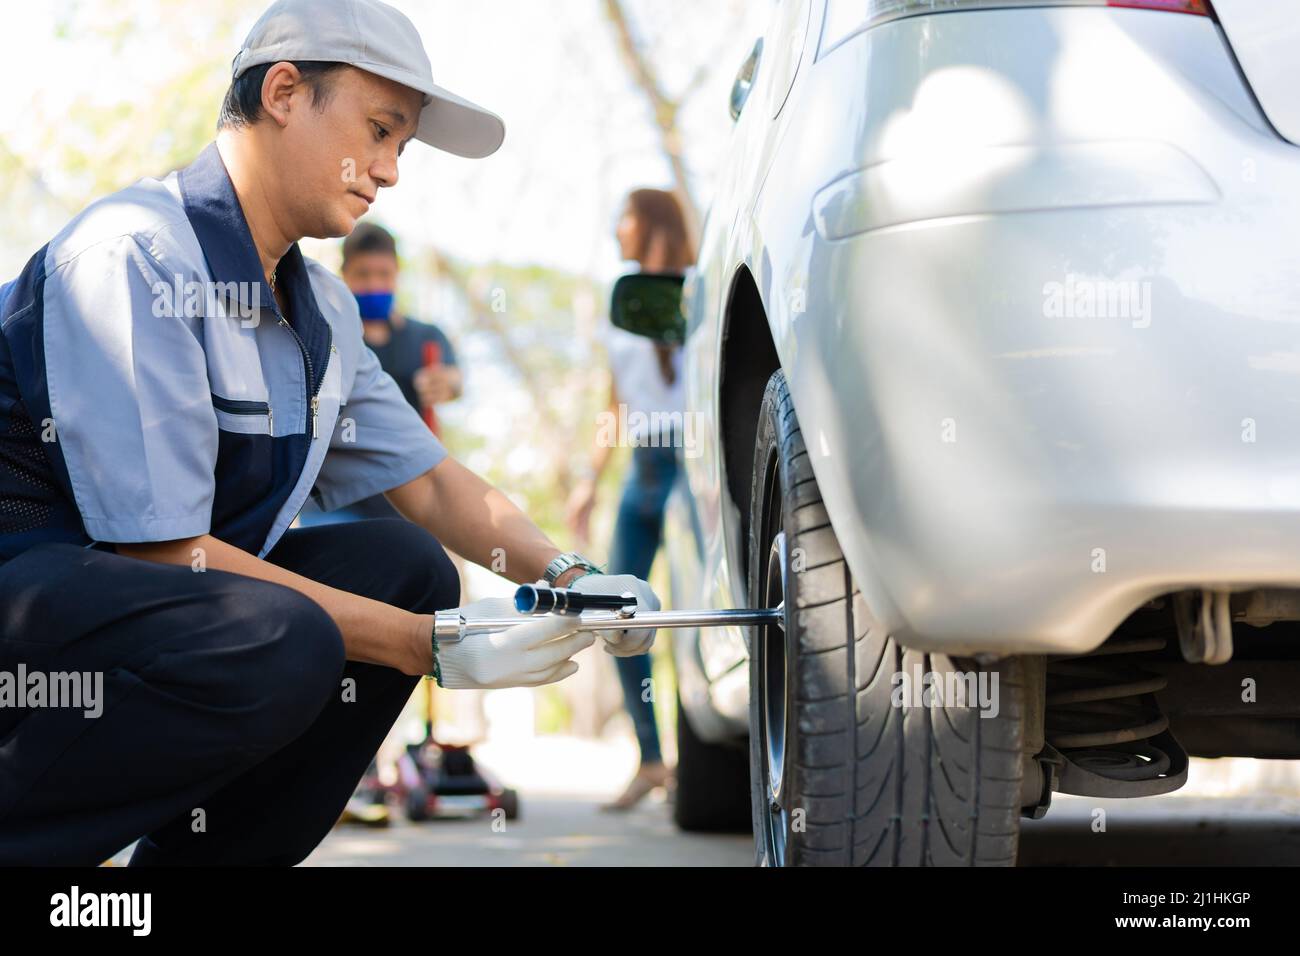 Expertise mechanic man  in uniform using force trying to unscrew the wheel bolts nuts and help a woman for changing car wheel on the highway, car serv Stock Photo